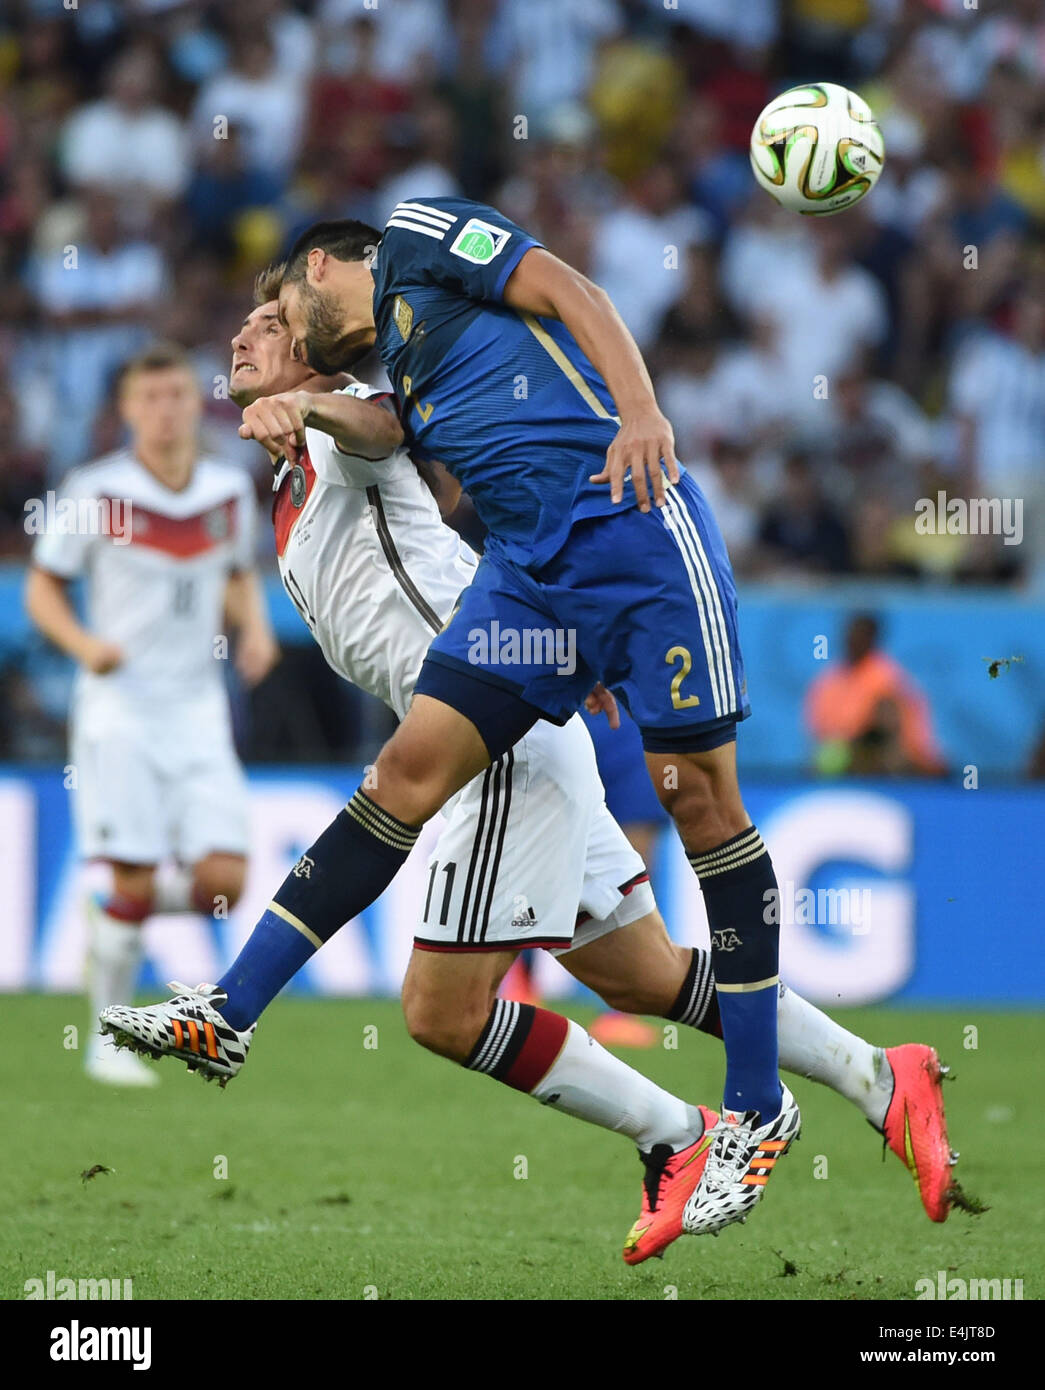 Rio De Janeiro, Brazil. 13th July, 2014. Argentina's Ezequiel Garay (R) vies with Germany's Miroslav Klose during the final match between Germany and Argentina of 2014 FIFA World Cup at the Estadio do Maracana Stadium in Rio de Janeiro, Brazil, on July 13, 2014. Credit:  Liu Dawei/Xinhua/Alamy Live News Stock Photo